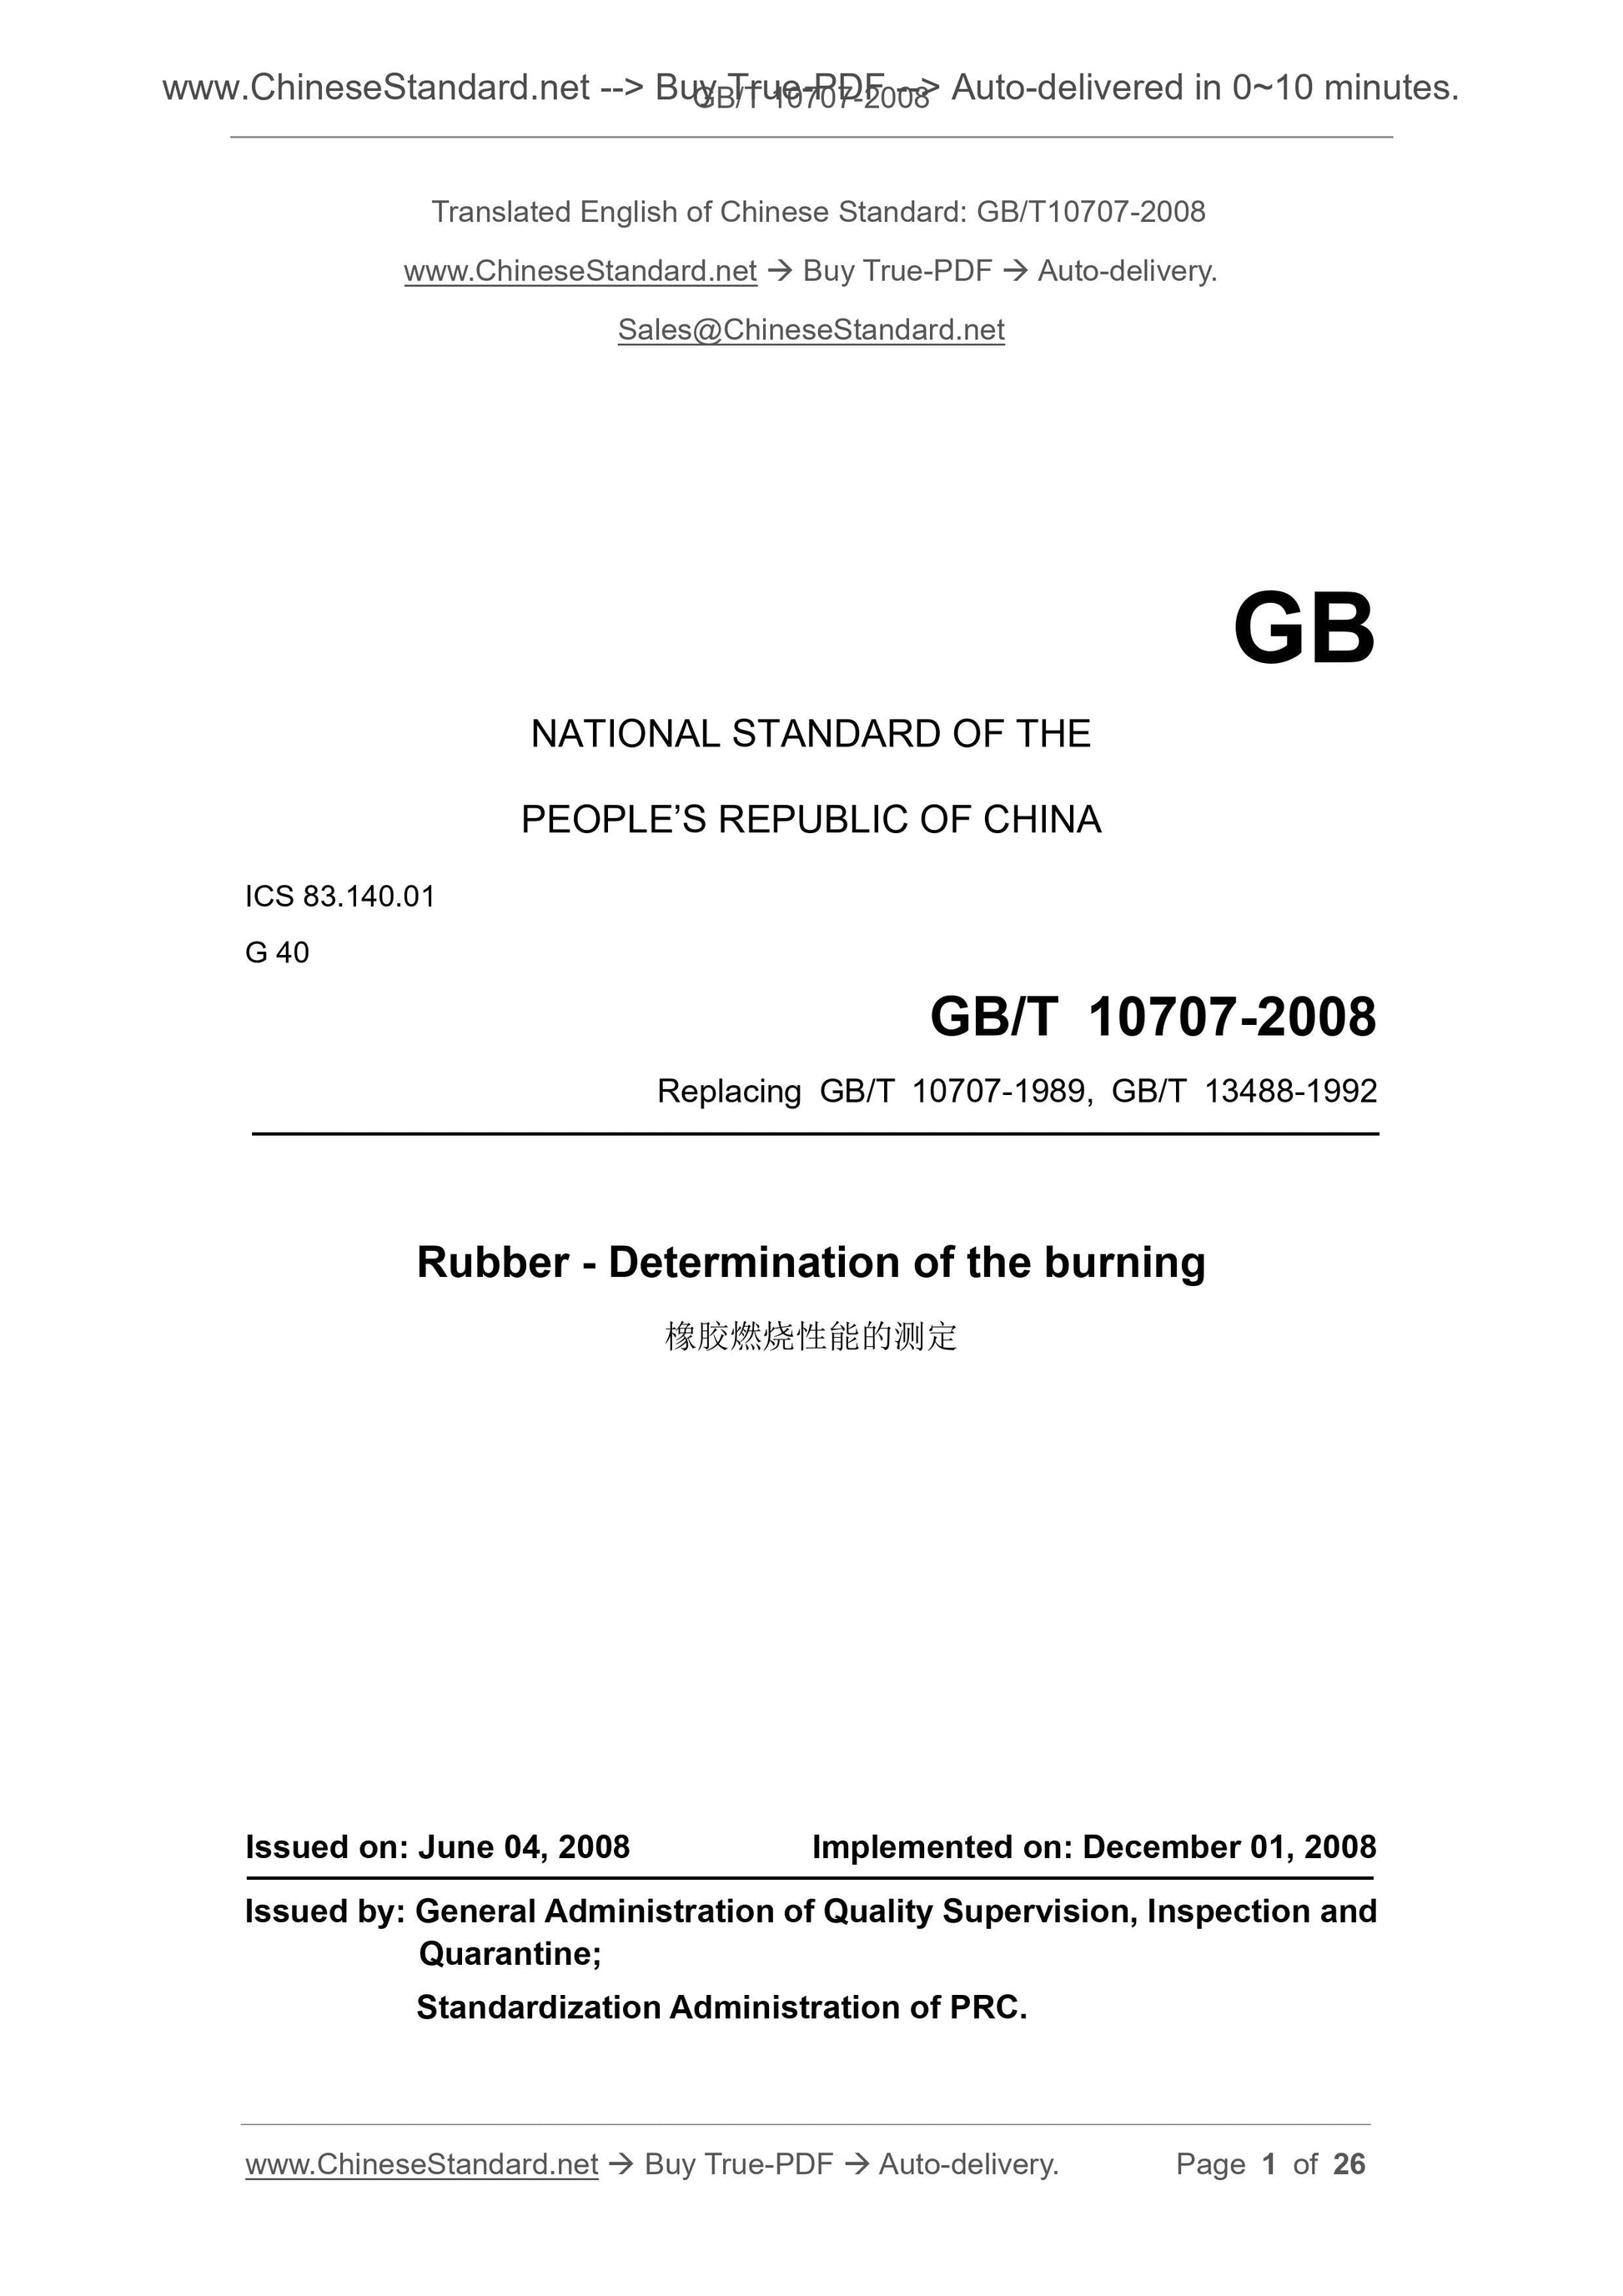 GB/T 10707-2008 Page 1